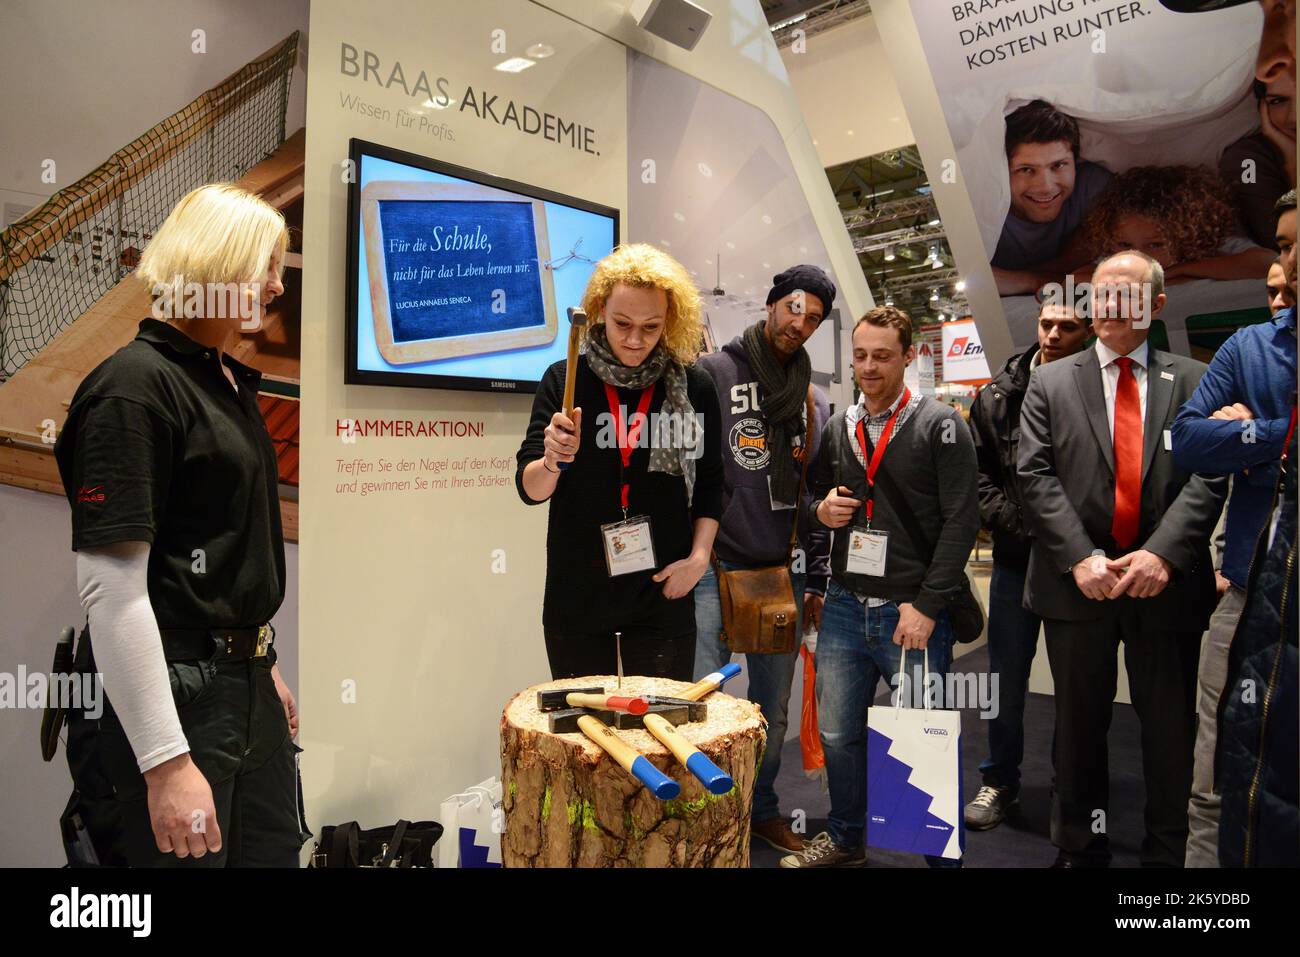 02-20-2014 Cologne, Germ Stunning blondes try to hammer a huge nail with a hammer at the booth of the company that produces these hammers Stock Photo